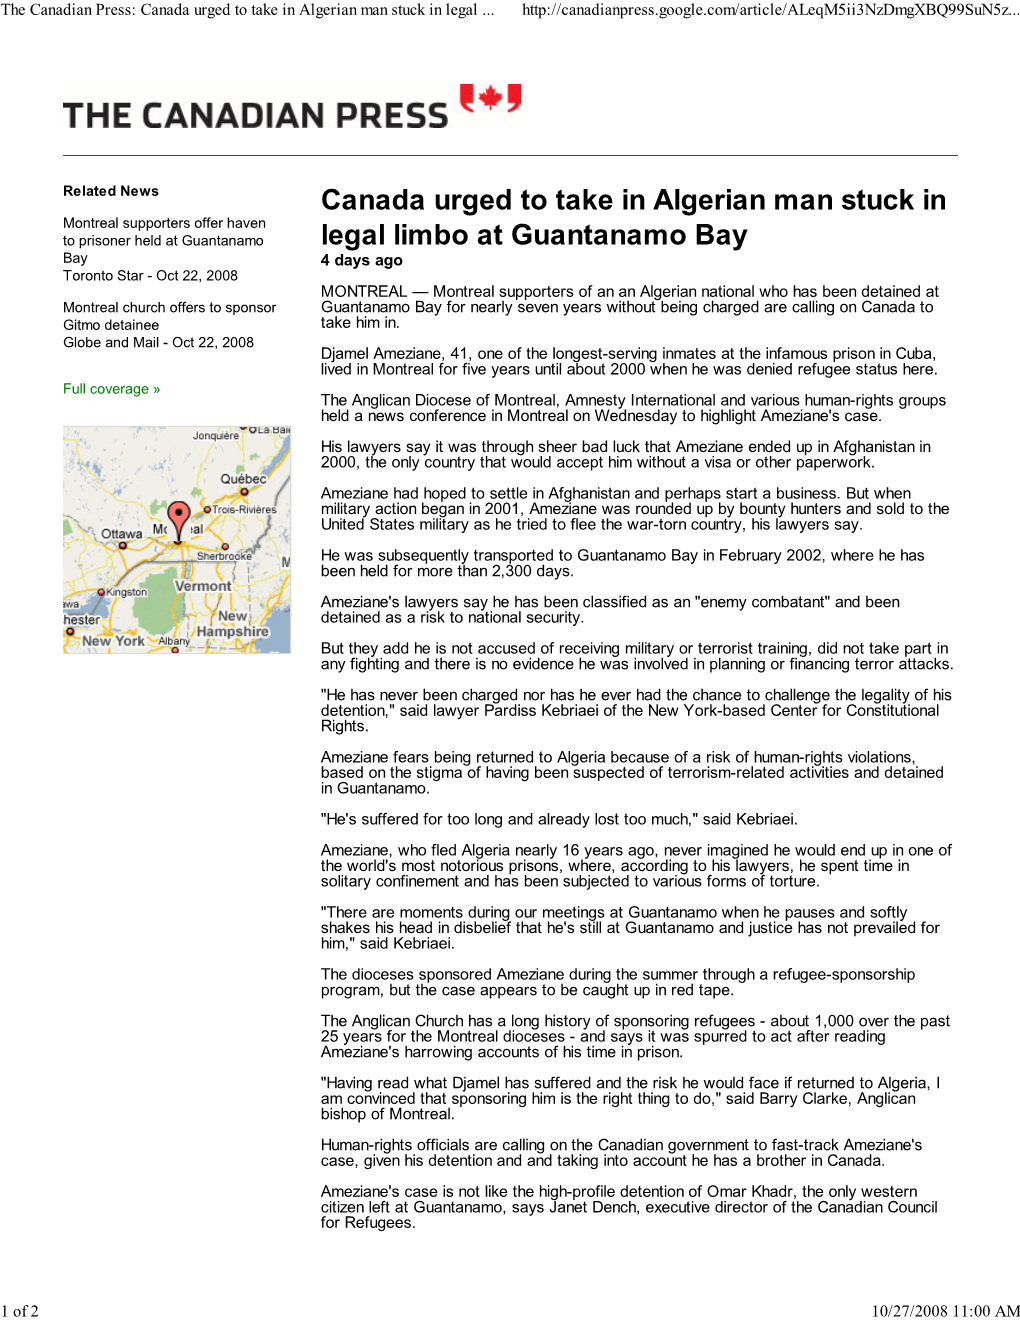 The Canadian Press: Canada Urged to Take in Algerian Man Stuck in Legal